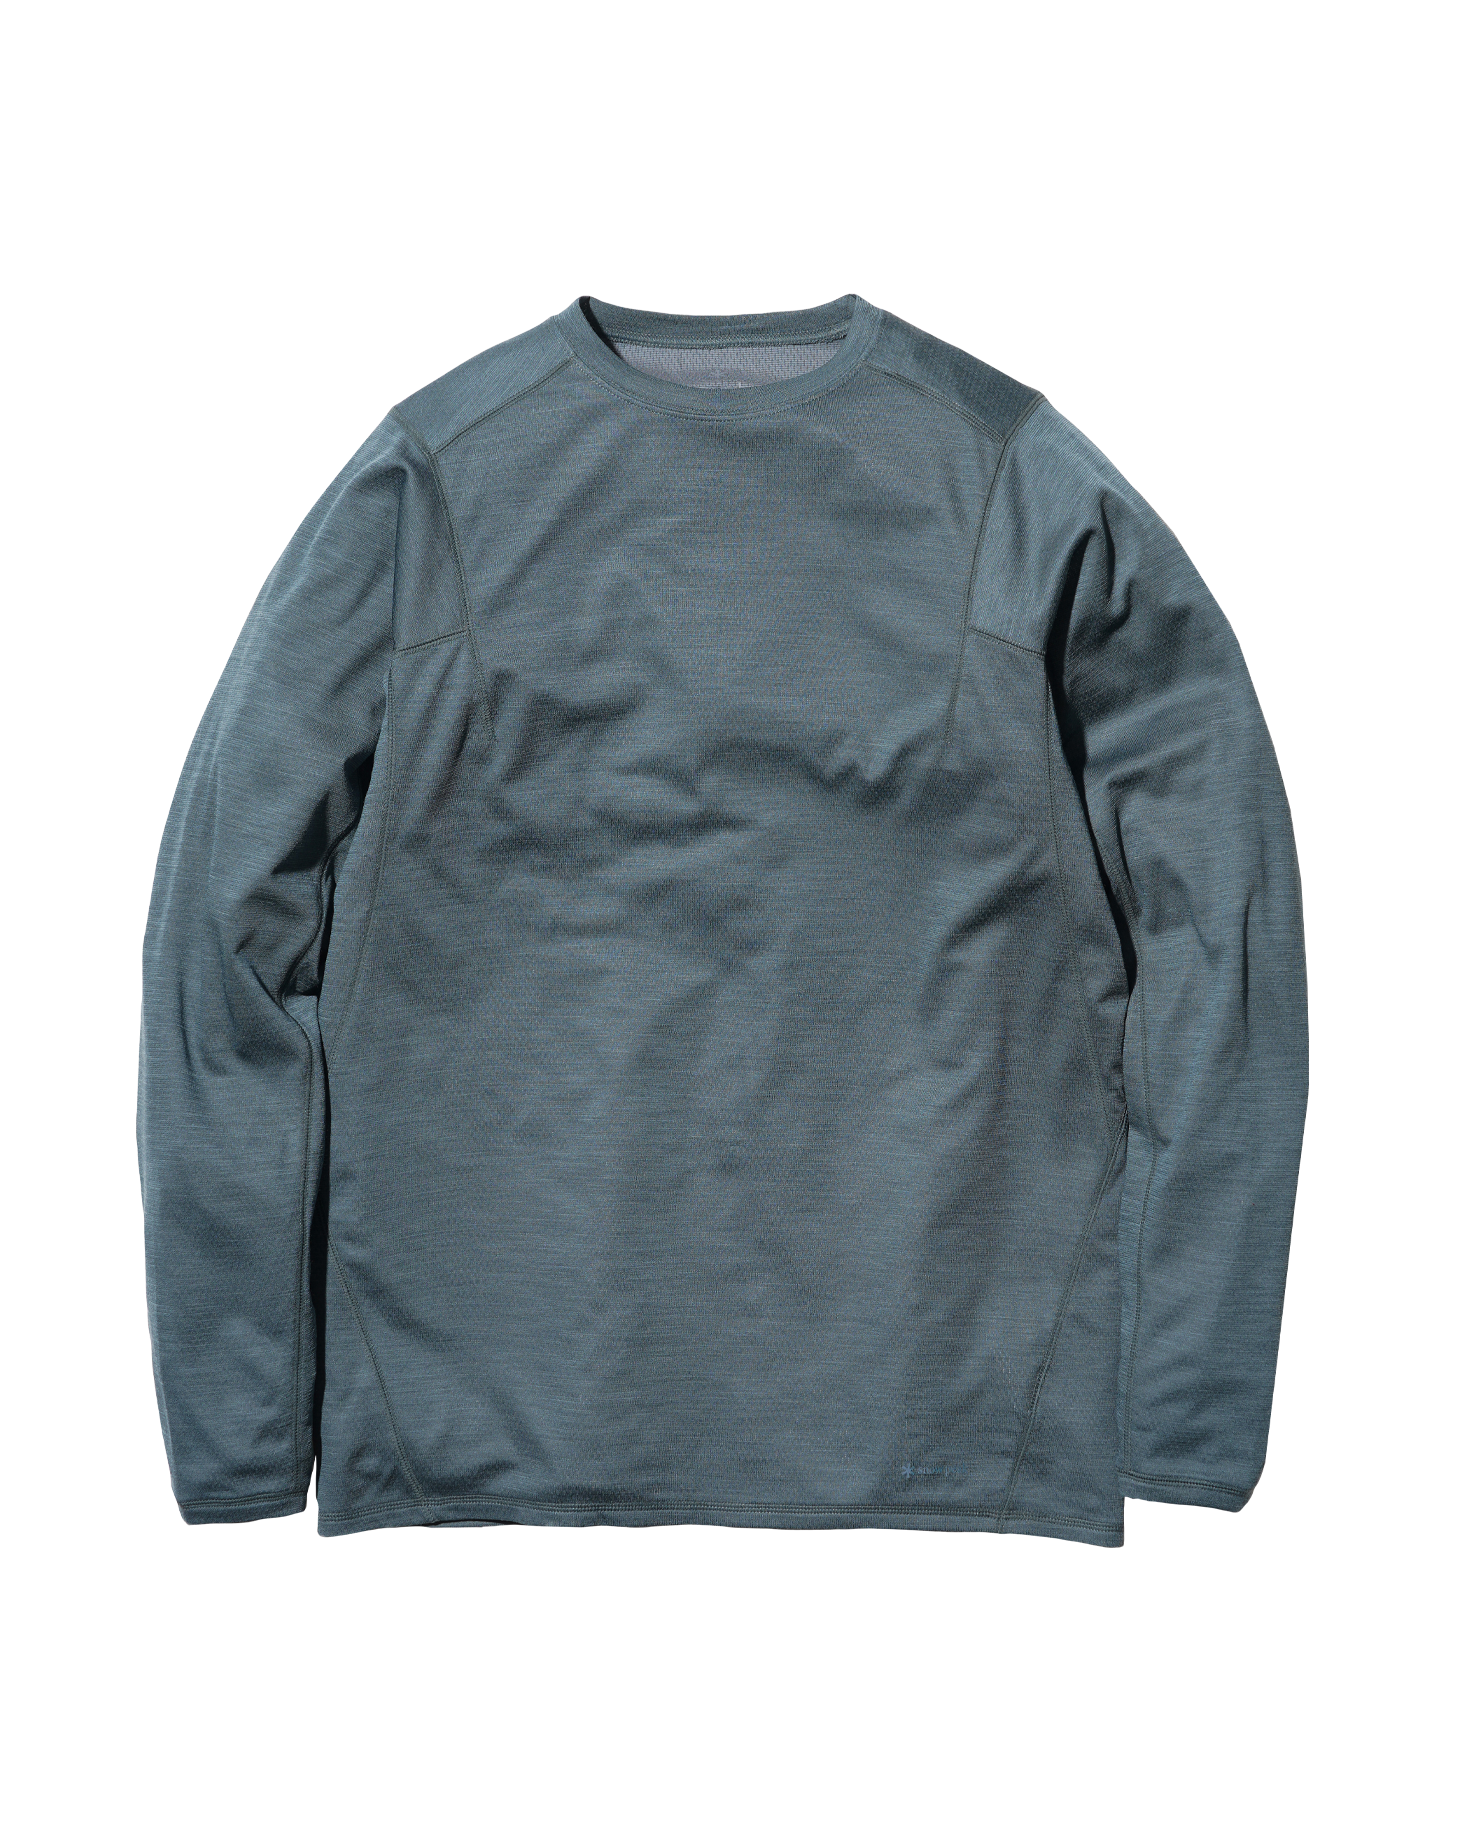 Recycled Polyester Clothing & Pure Organic Cotton Blends from